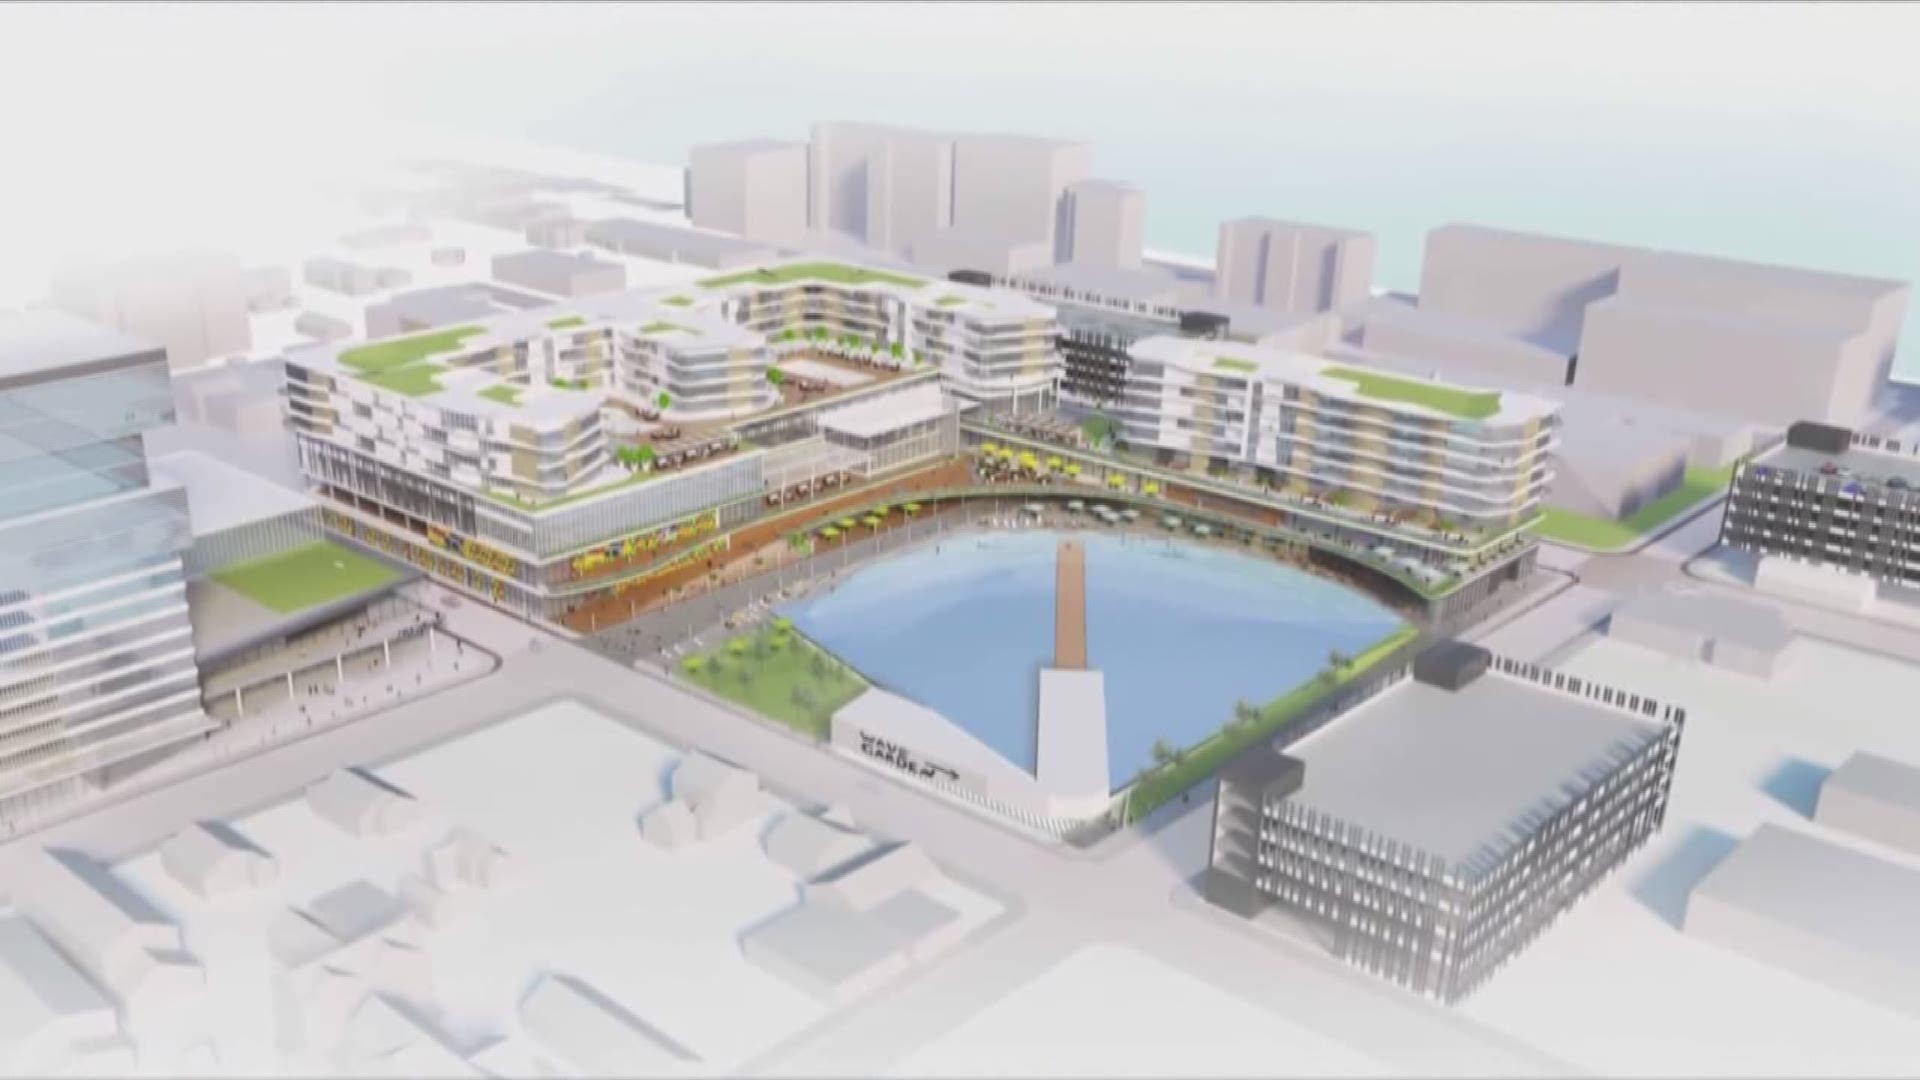 Virginia Beach City Council voted 10-0 in favor of the Dome site project. The entertainment complex that Pharrell advocated for will include a surf park.